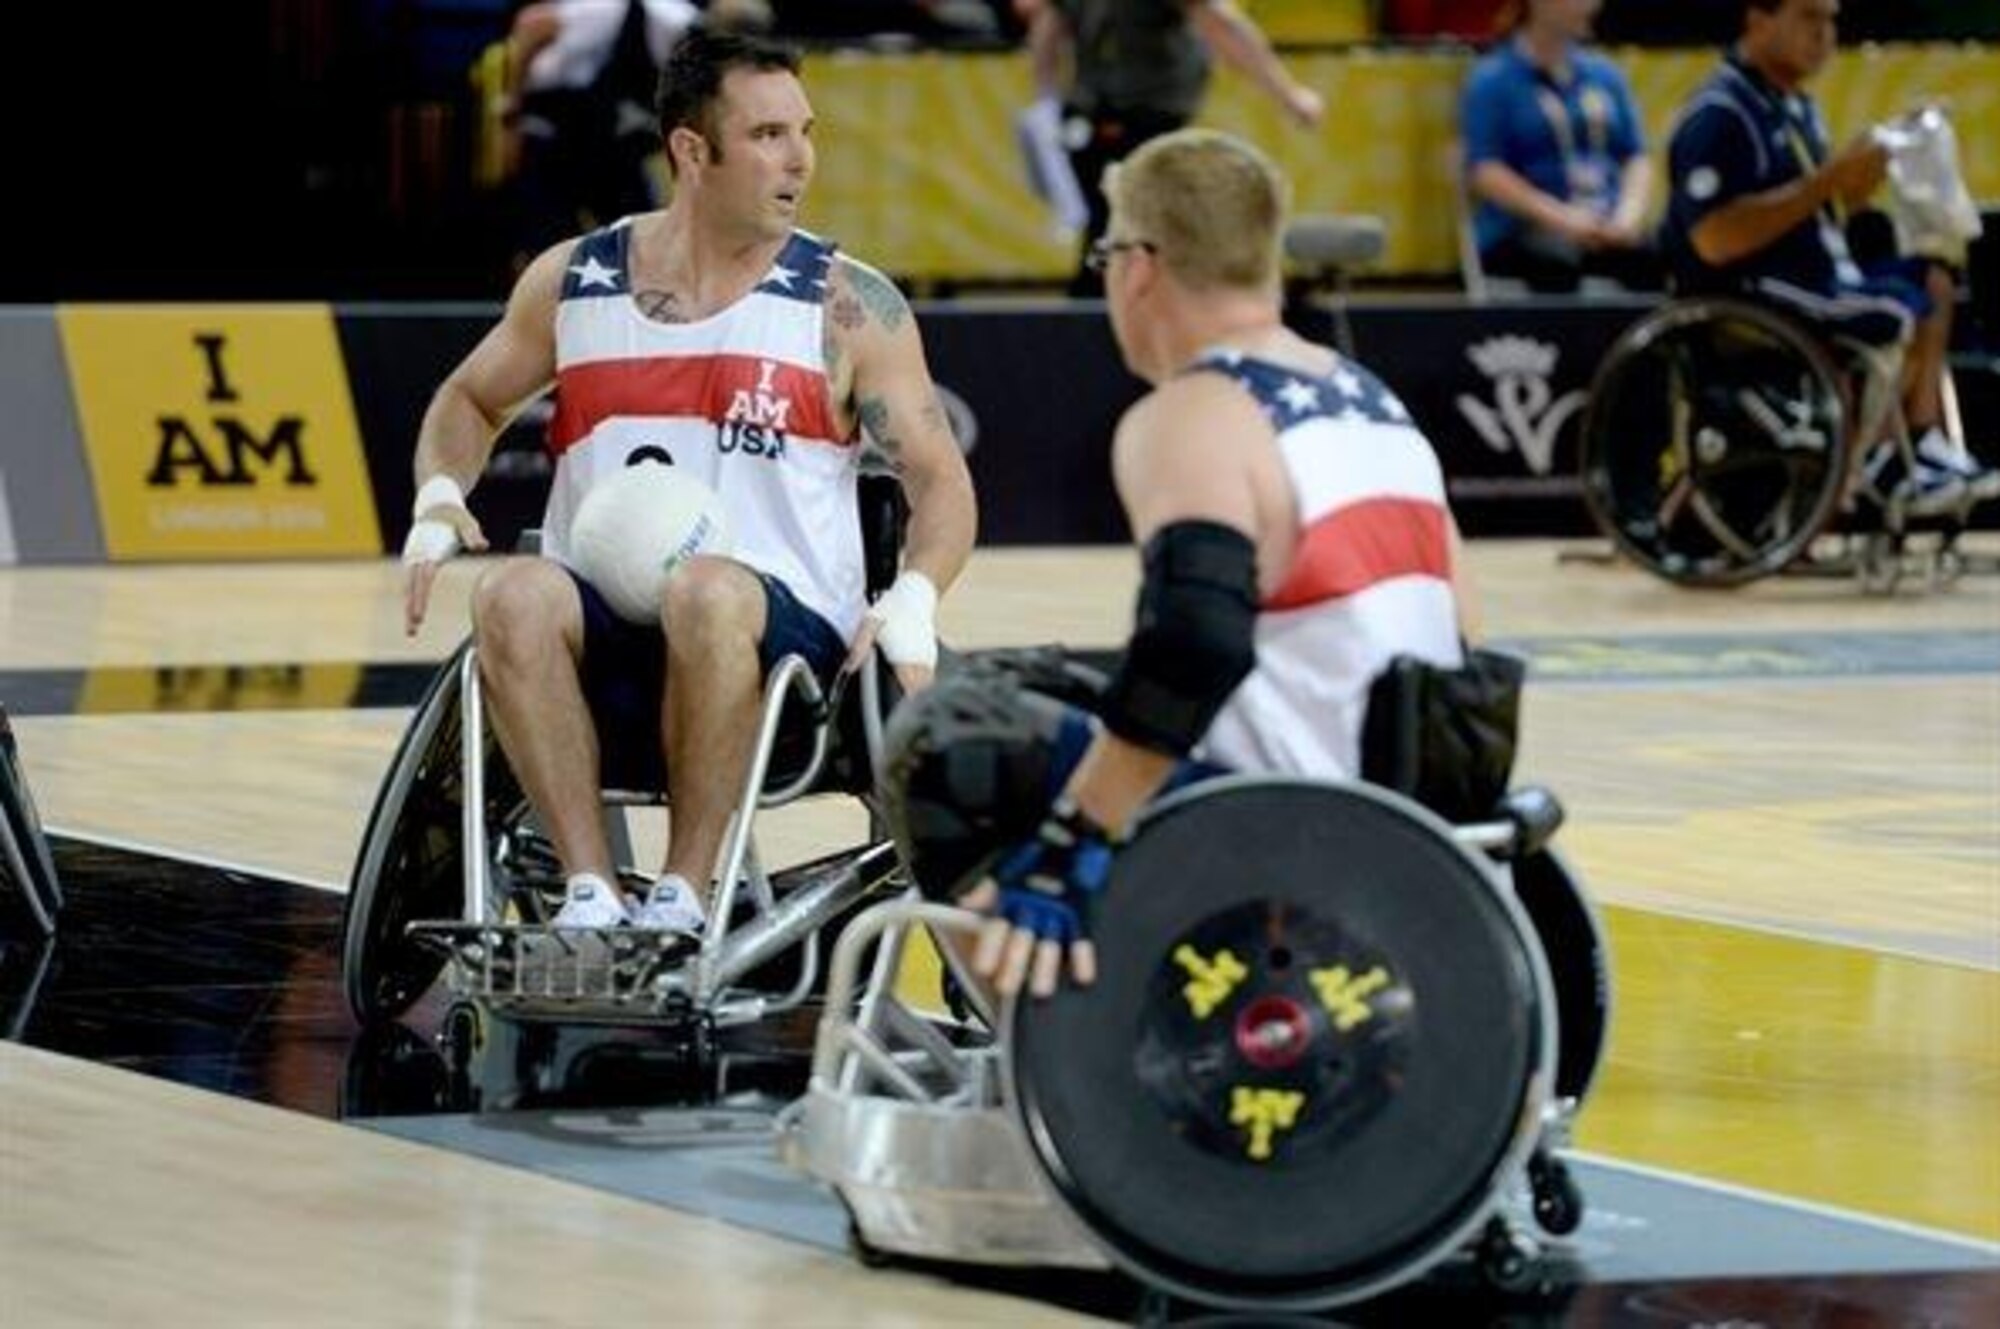 Air Force Staff Sgt. Christopher D'Angelo warms up before a wheelchair rugby match against the Australian wheelchair rugby team Sept. 12, 2014, at the 2014 Invictus Games in London. Invictus Games is an international competition that brings together wounded, injured and ill service members in the spirit of friendly athletic competition. American Soldiers, Sailors, Airmen and Marines are representing the U.S. in the competition which is taking place from Sept. 10-14. (U.S. Navy photo/Mass Communication Specialist 2nd Class Joshua D. Sheppard)
